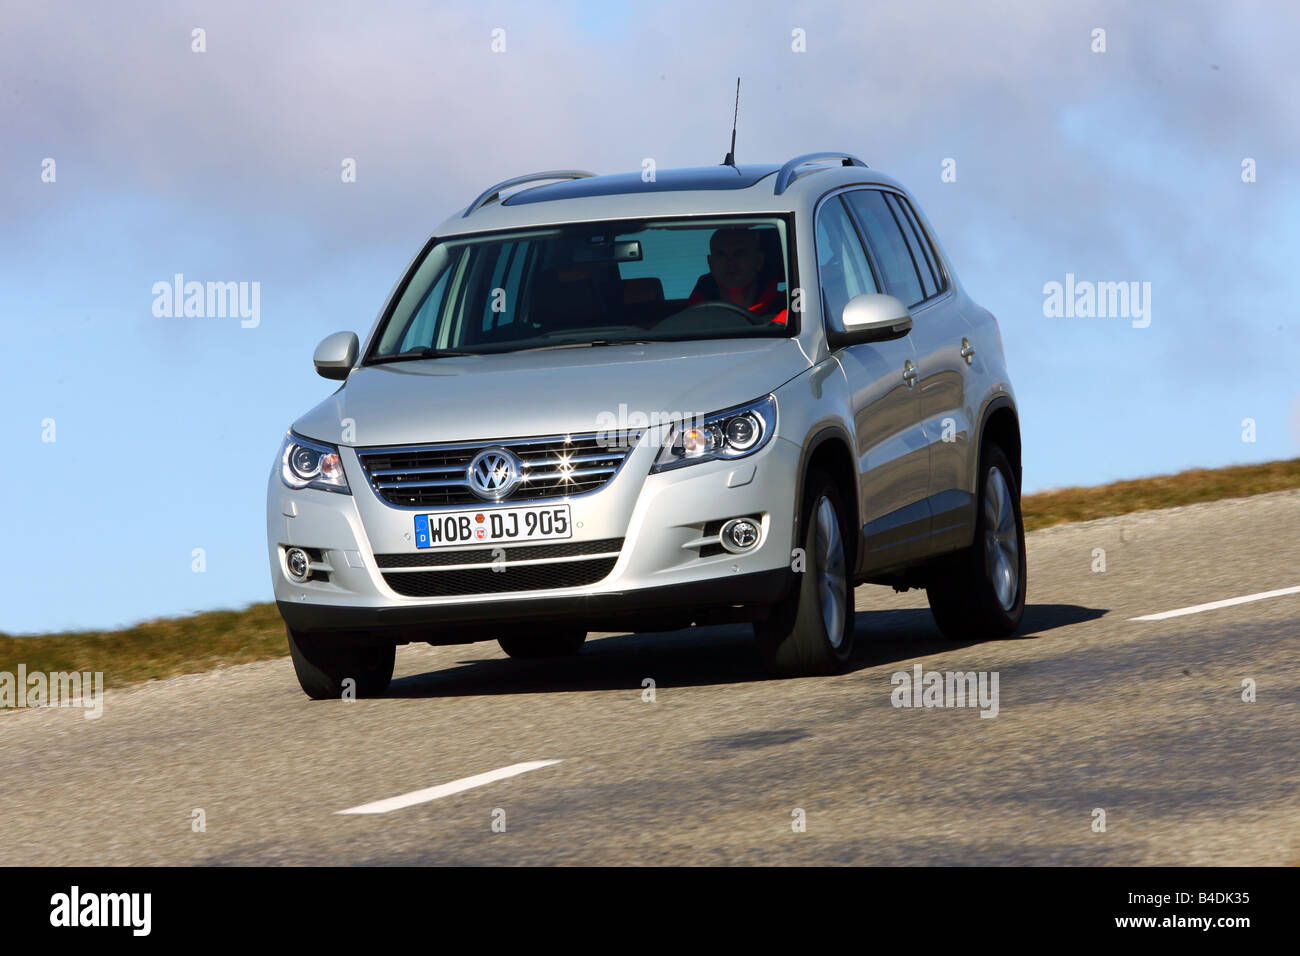 VW Volkswagen Tiguan 2.0 Sport & Style, model year 2007-, silver, driving, diagonal from the front, frontal view, country road Stock Photo